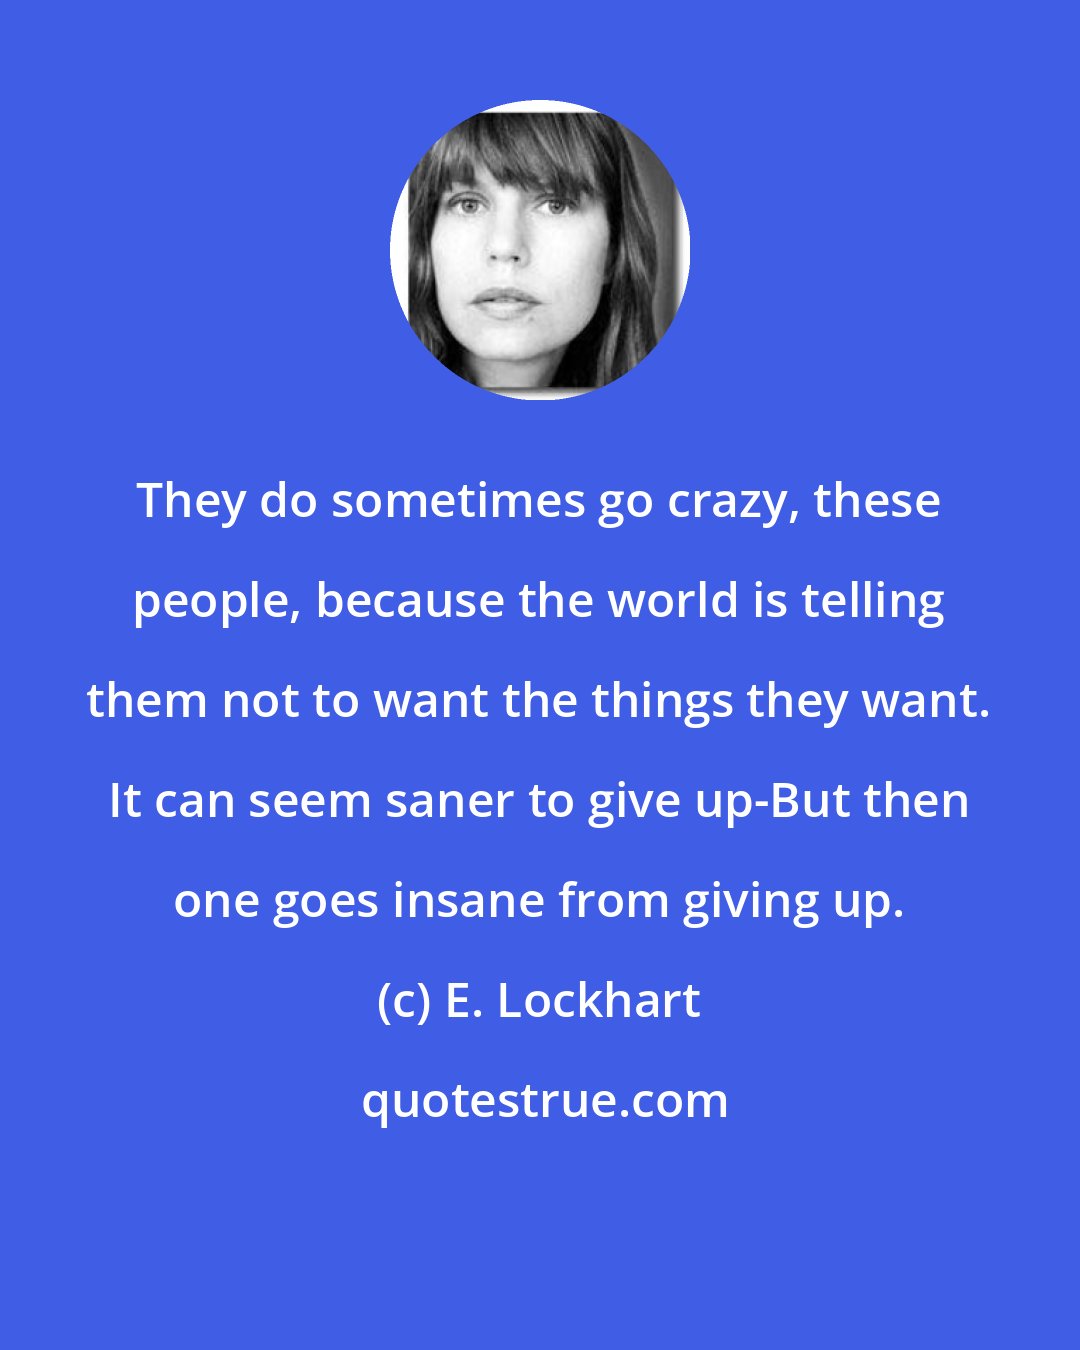 E. Lockhart: They do sometimes go crazy, these people, because the world is telling them not to want the things they want. It can seem saner to give up-But then one goes insane from giving up.